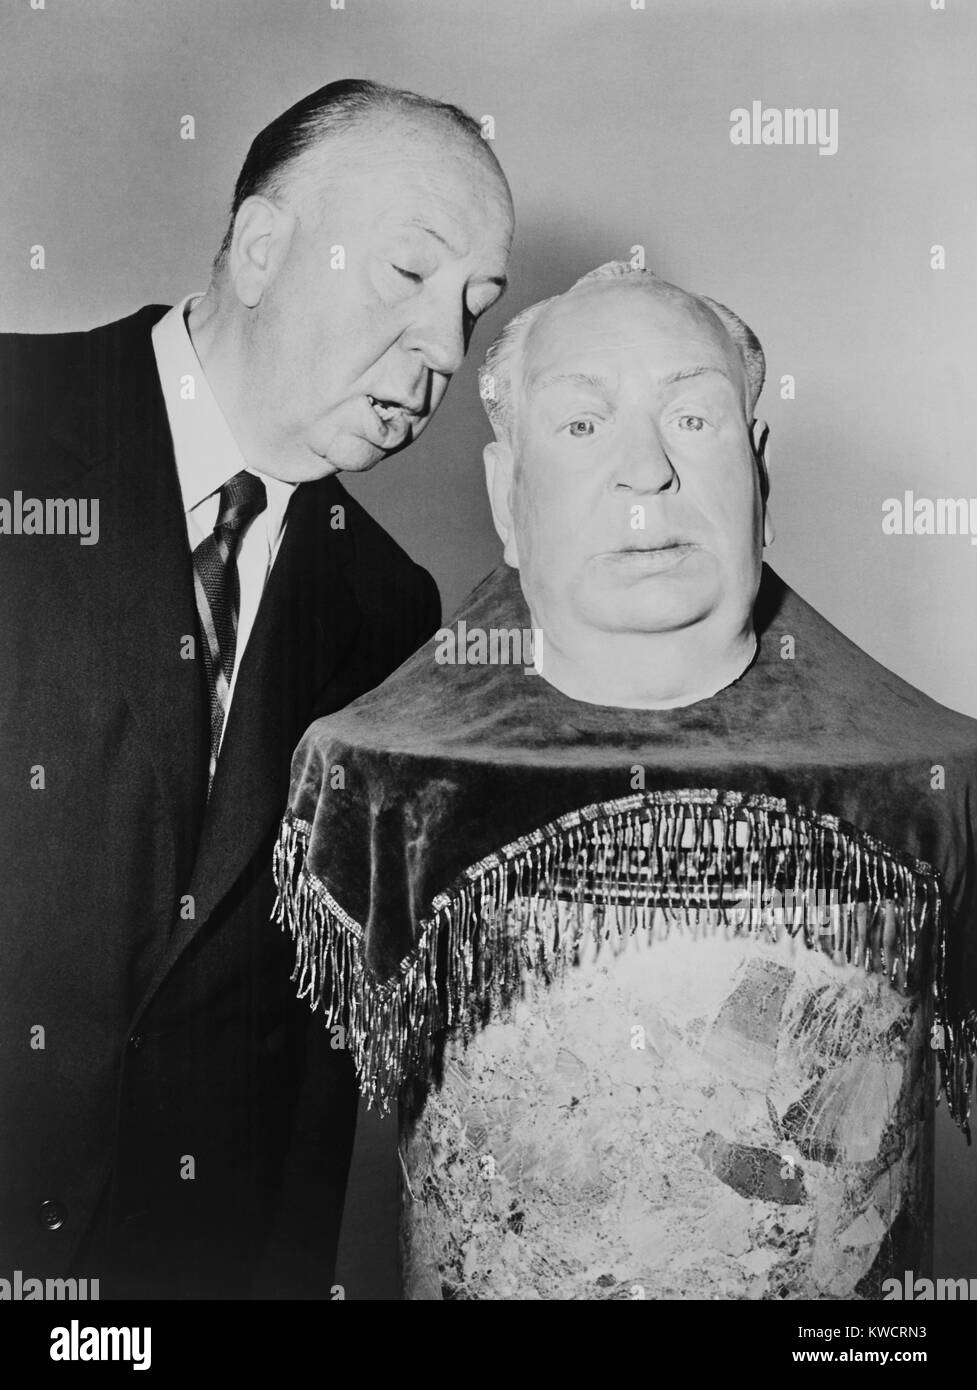 Alfred Hitchcock whispering into the ear of a plaster sculpture of his head. It will be his stand-in as he begins shooting the fourth TV season premiere of 'Alfred Hitchcock Presents.' Oct. 6, 1958. - (BSLOC_2015_1_20) Stock Photo